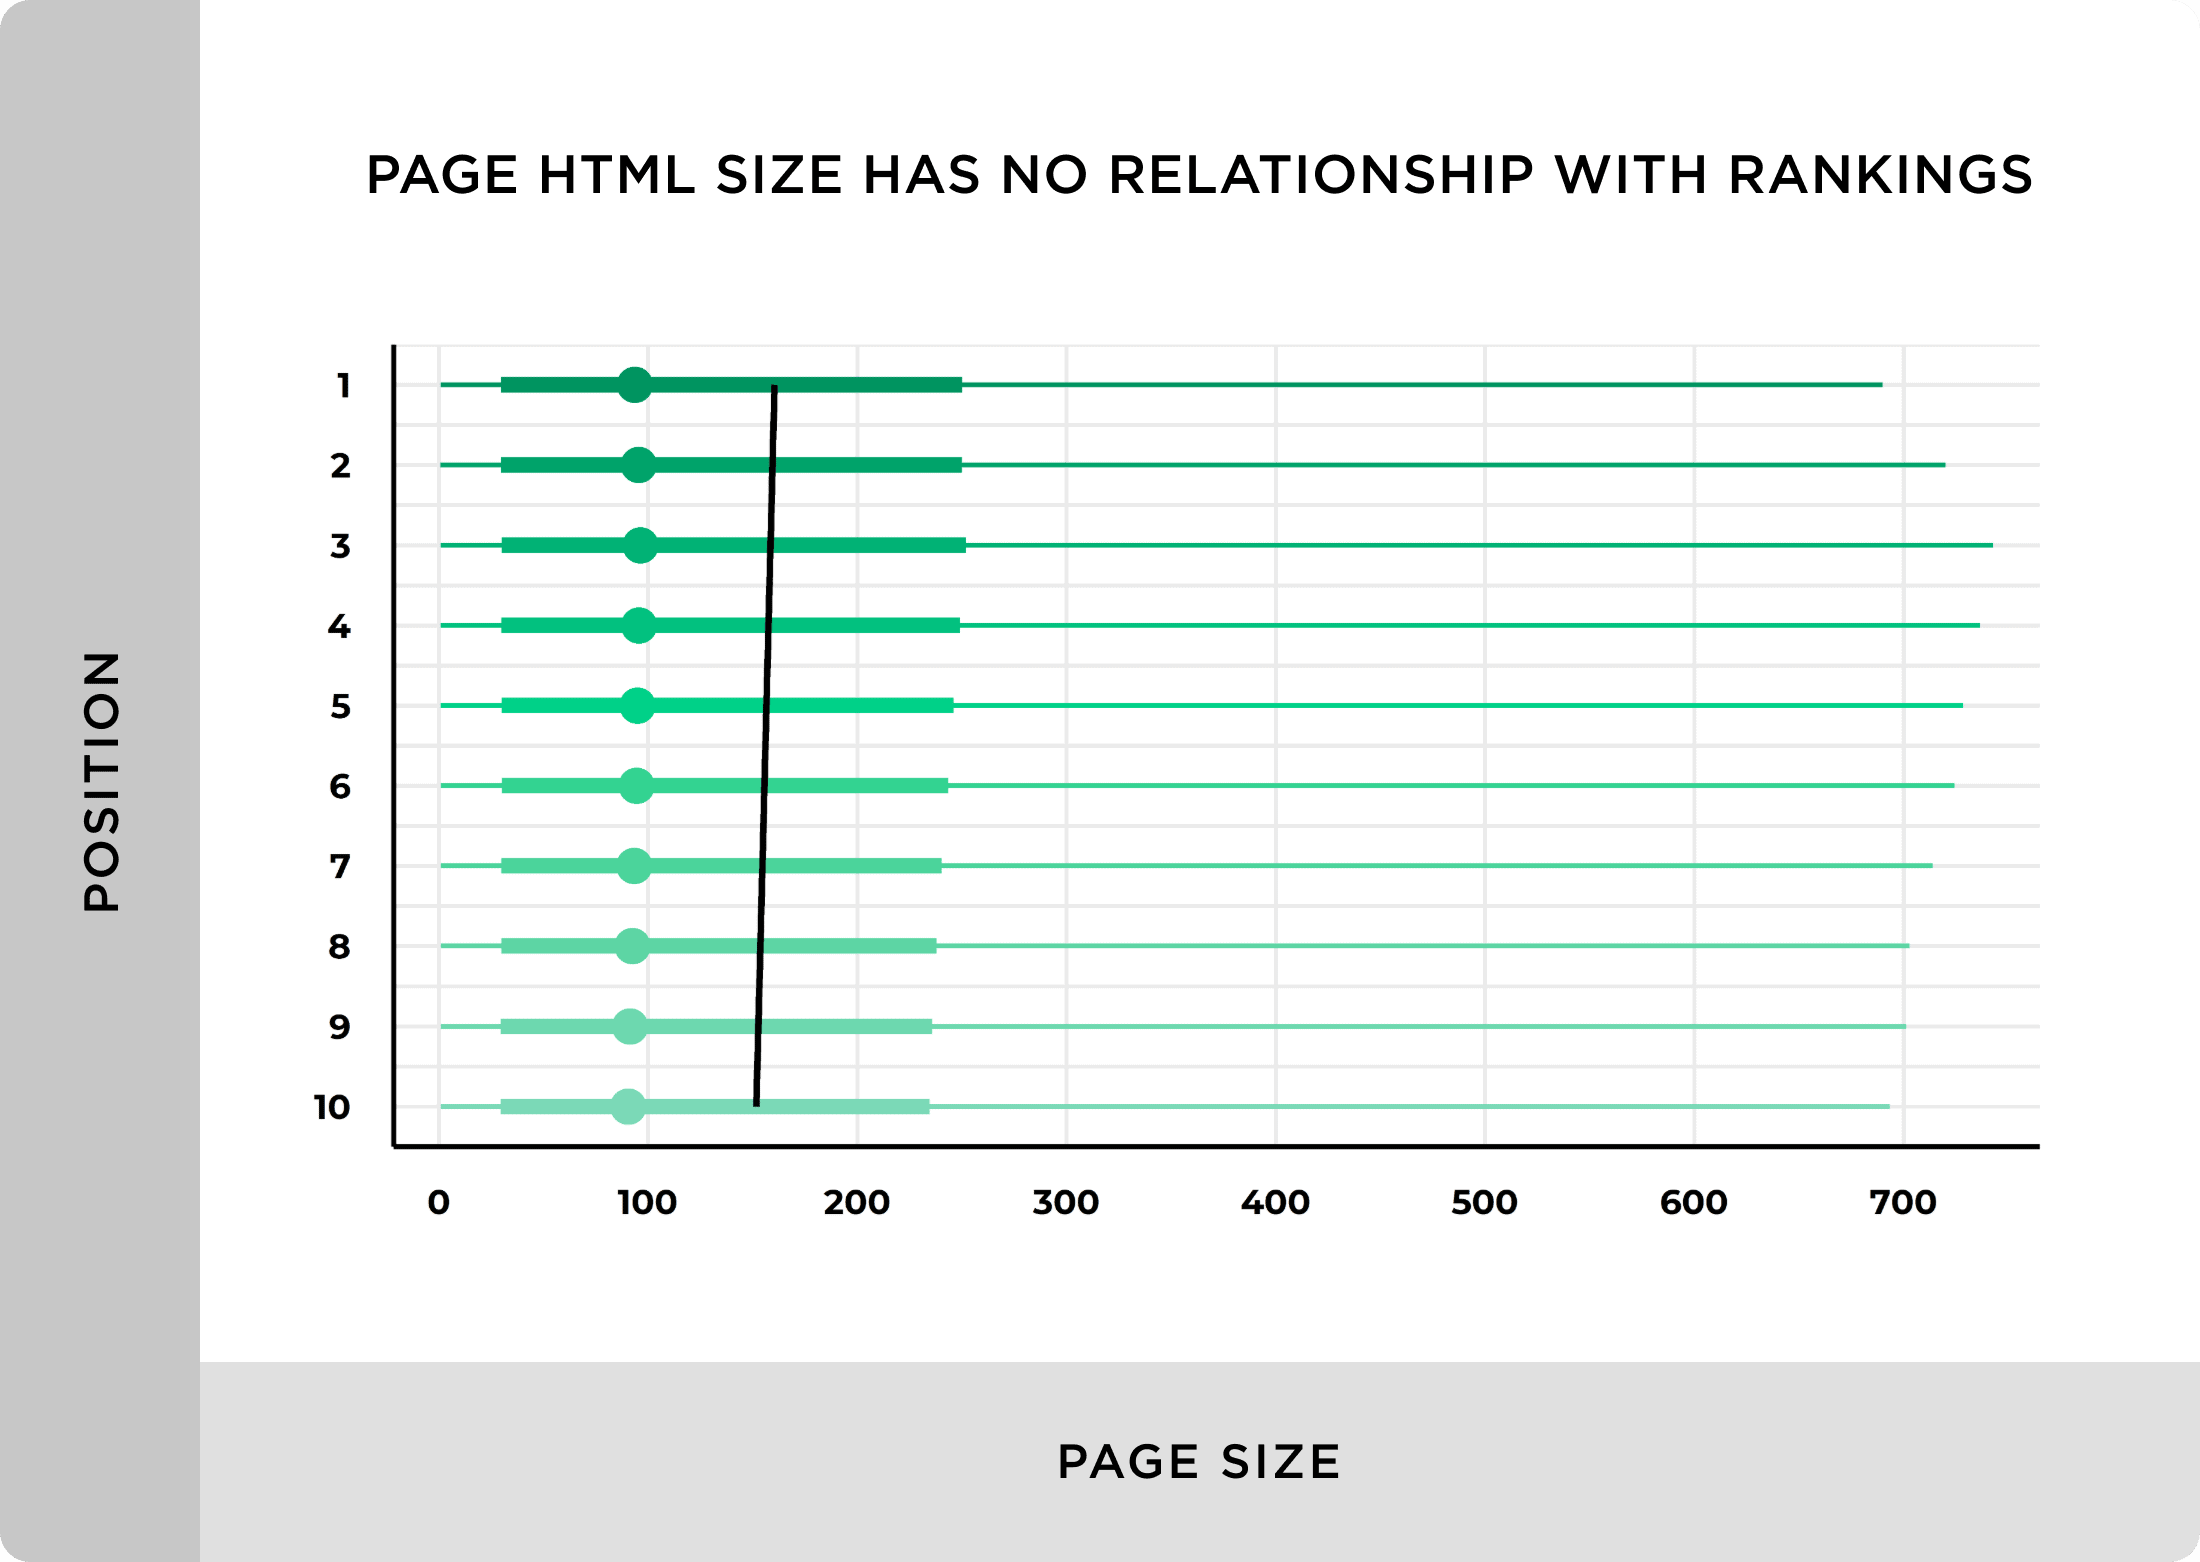 Page HTML size has no relationship with rankings